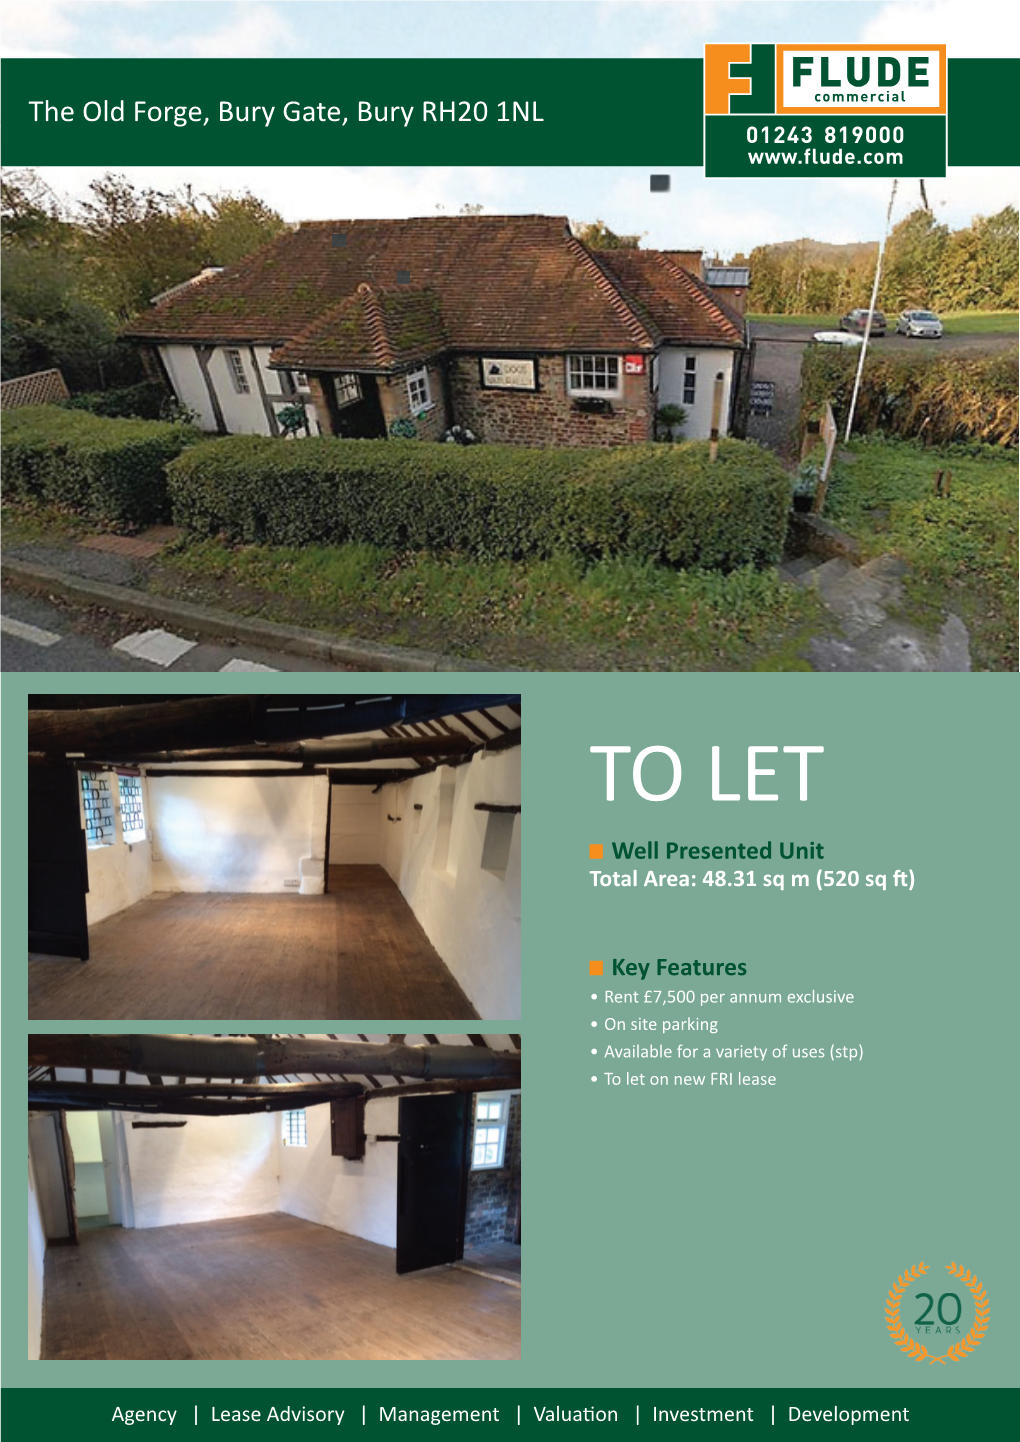 TO LET Well Presented Unit Total Area: 48.31 Sq M (520 Sq Ft)